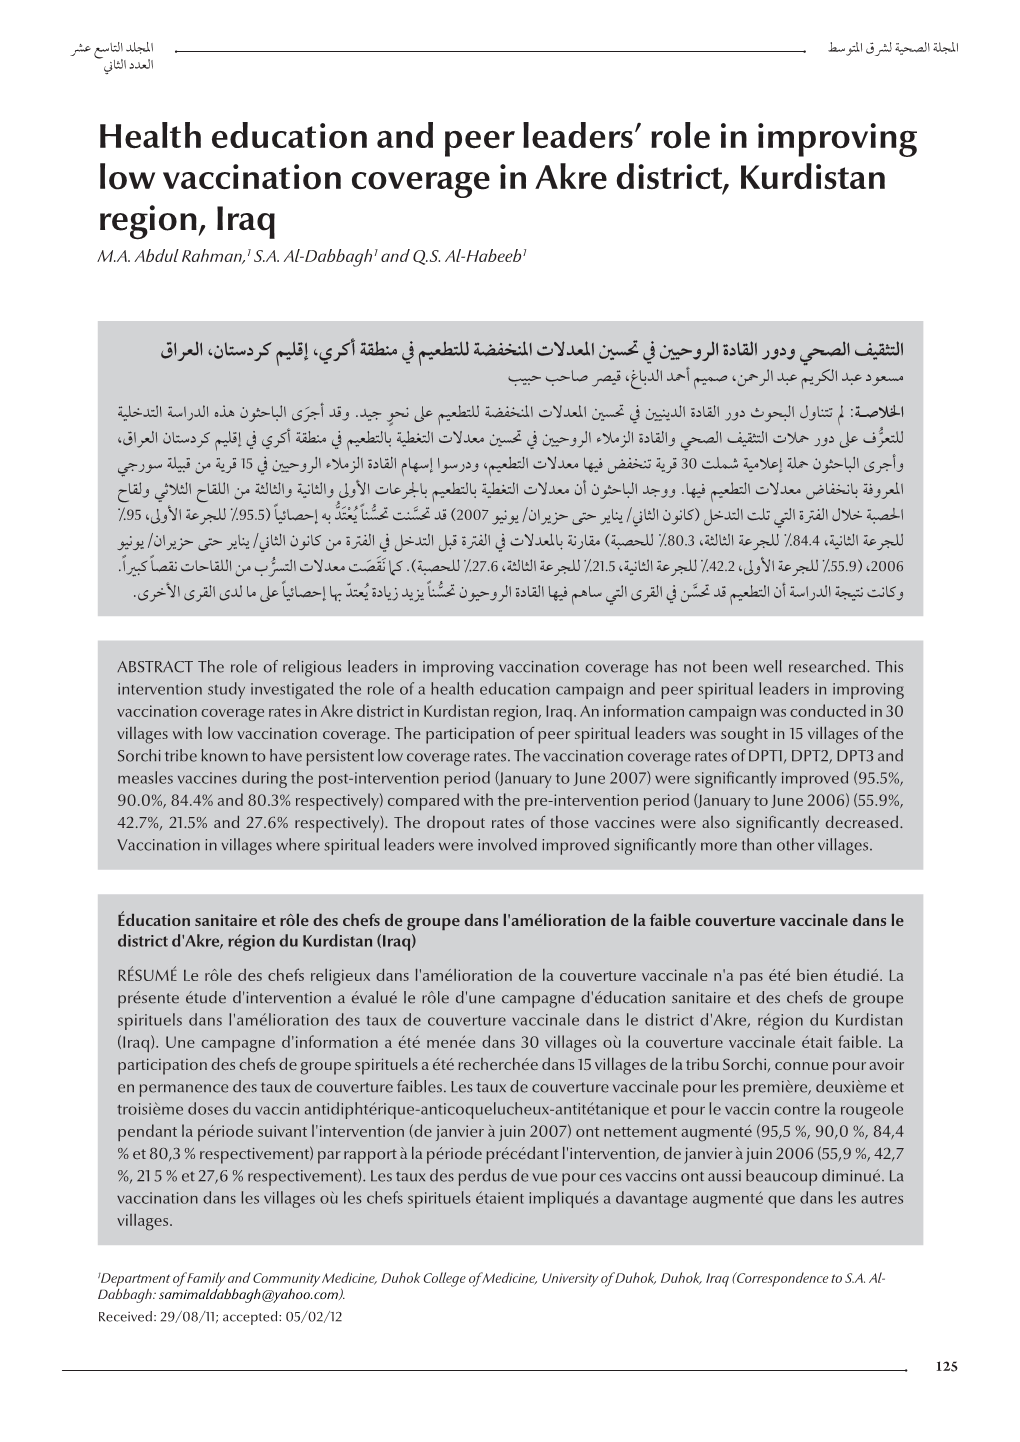 Health Education and Peer Leaders' Role in Improving Low Vaccination Coverage in Akre District, Kurdistan Region, Iraq